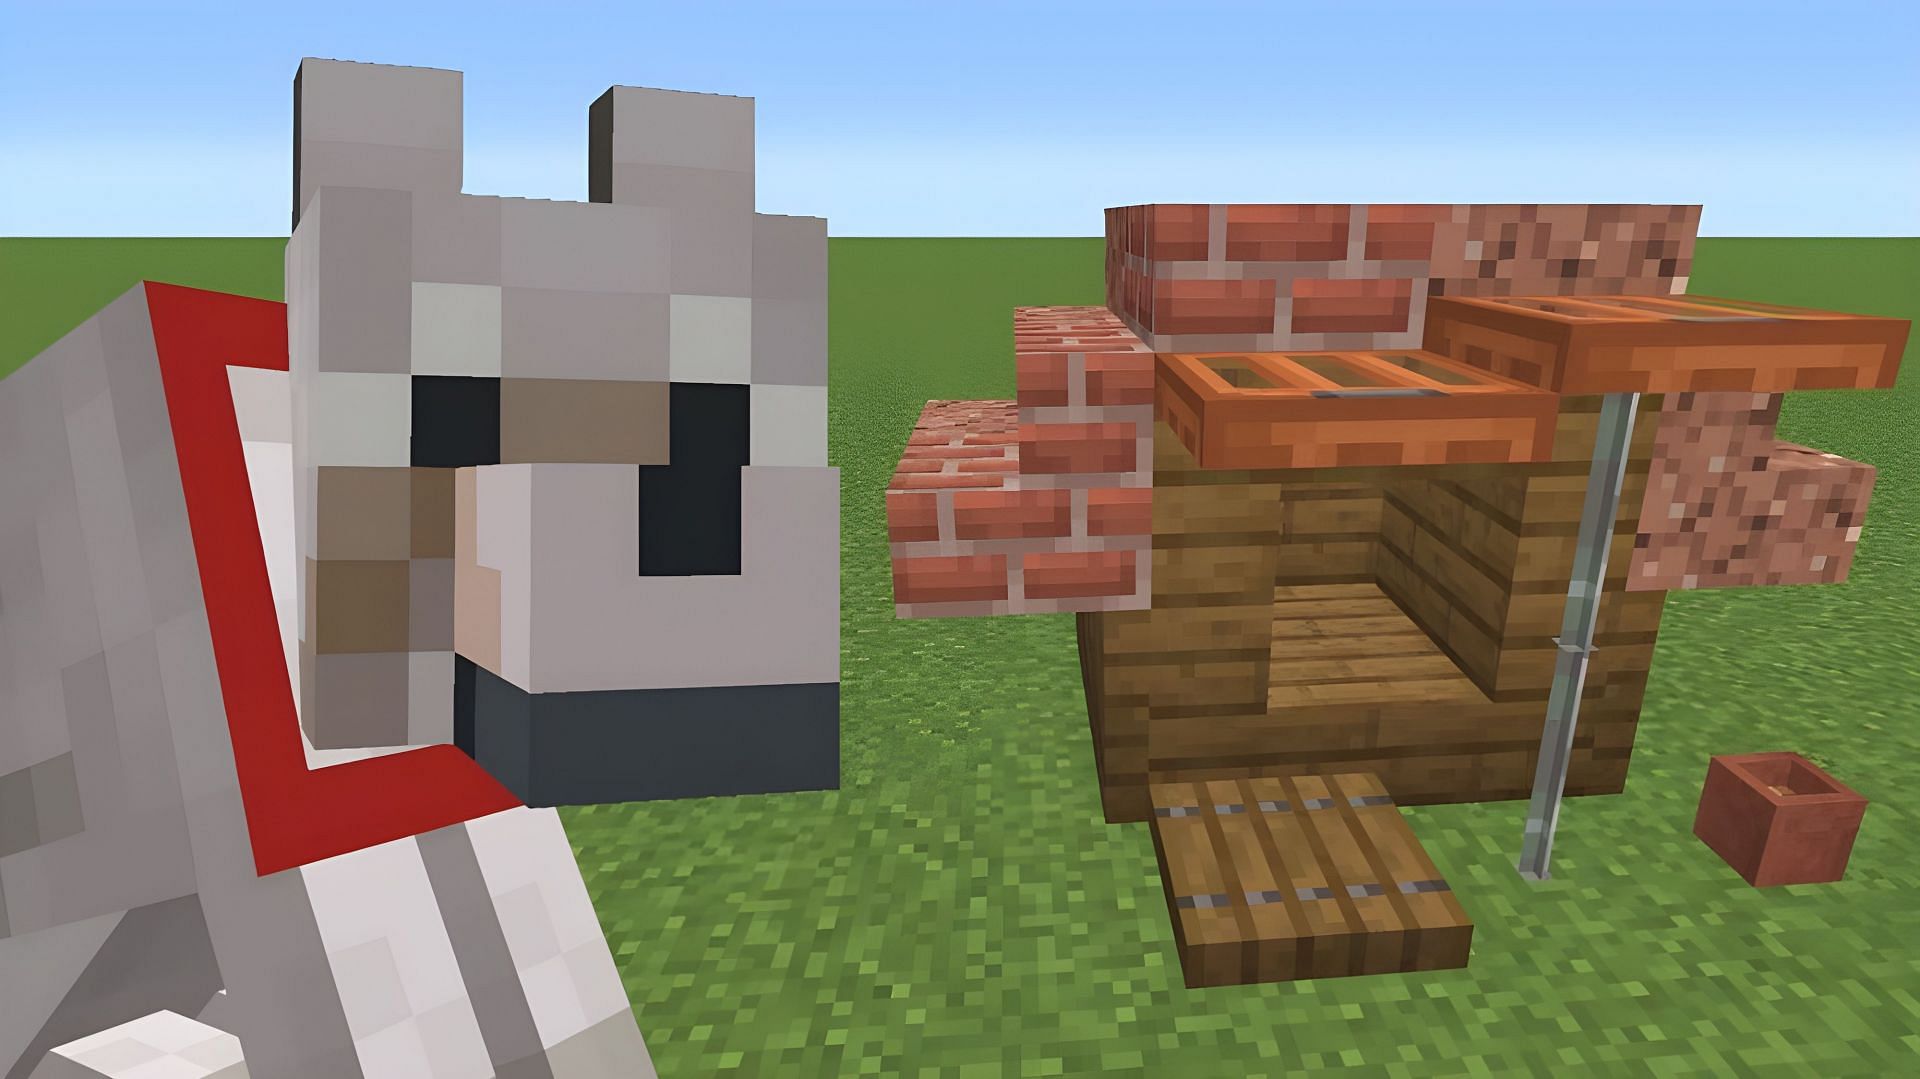 Doghouses can be nice homes for tamed wolfs in Minecraft (Image via Youtube/BBlocks)